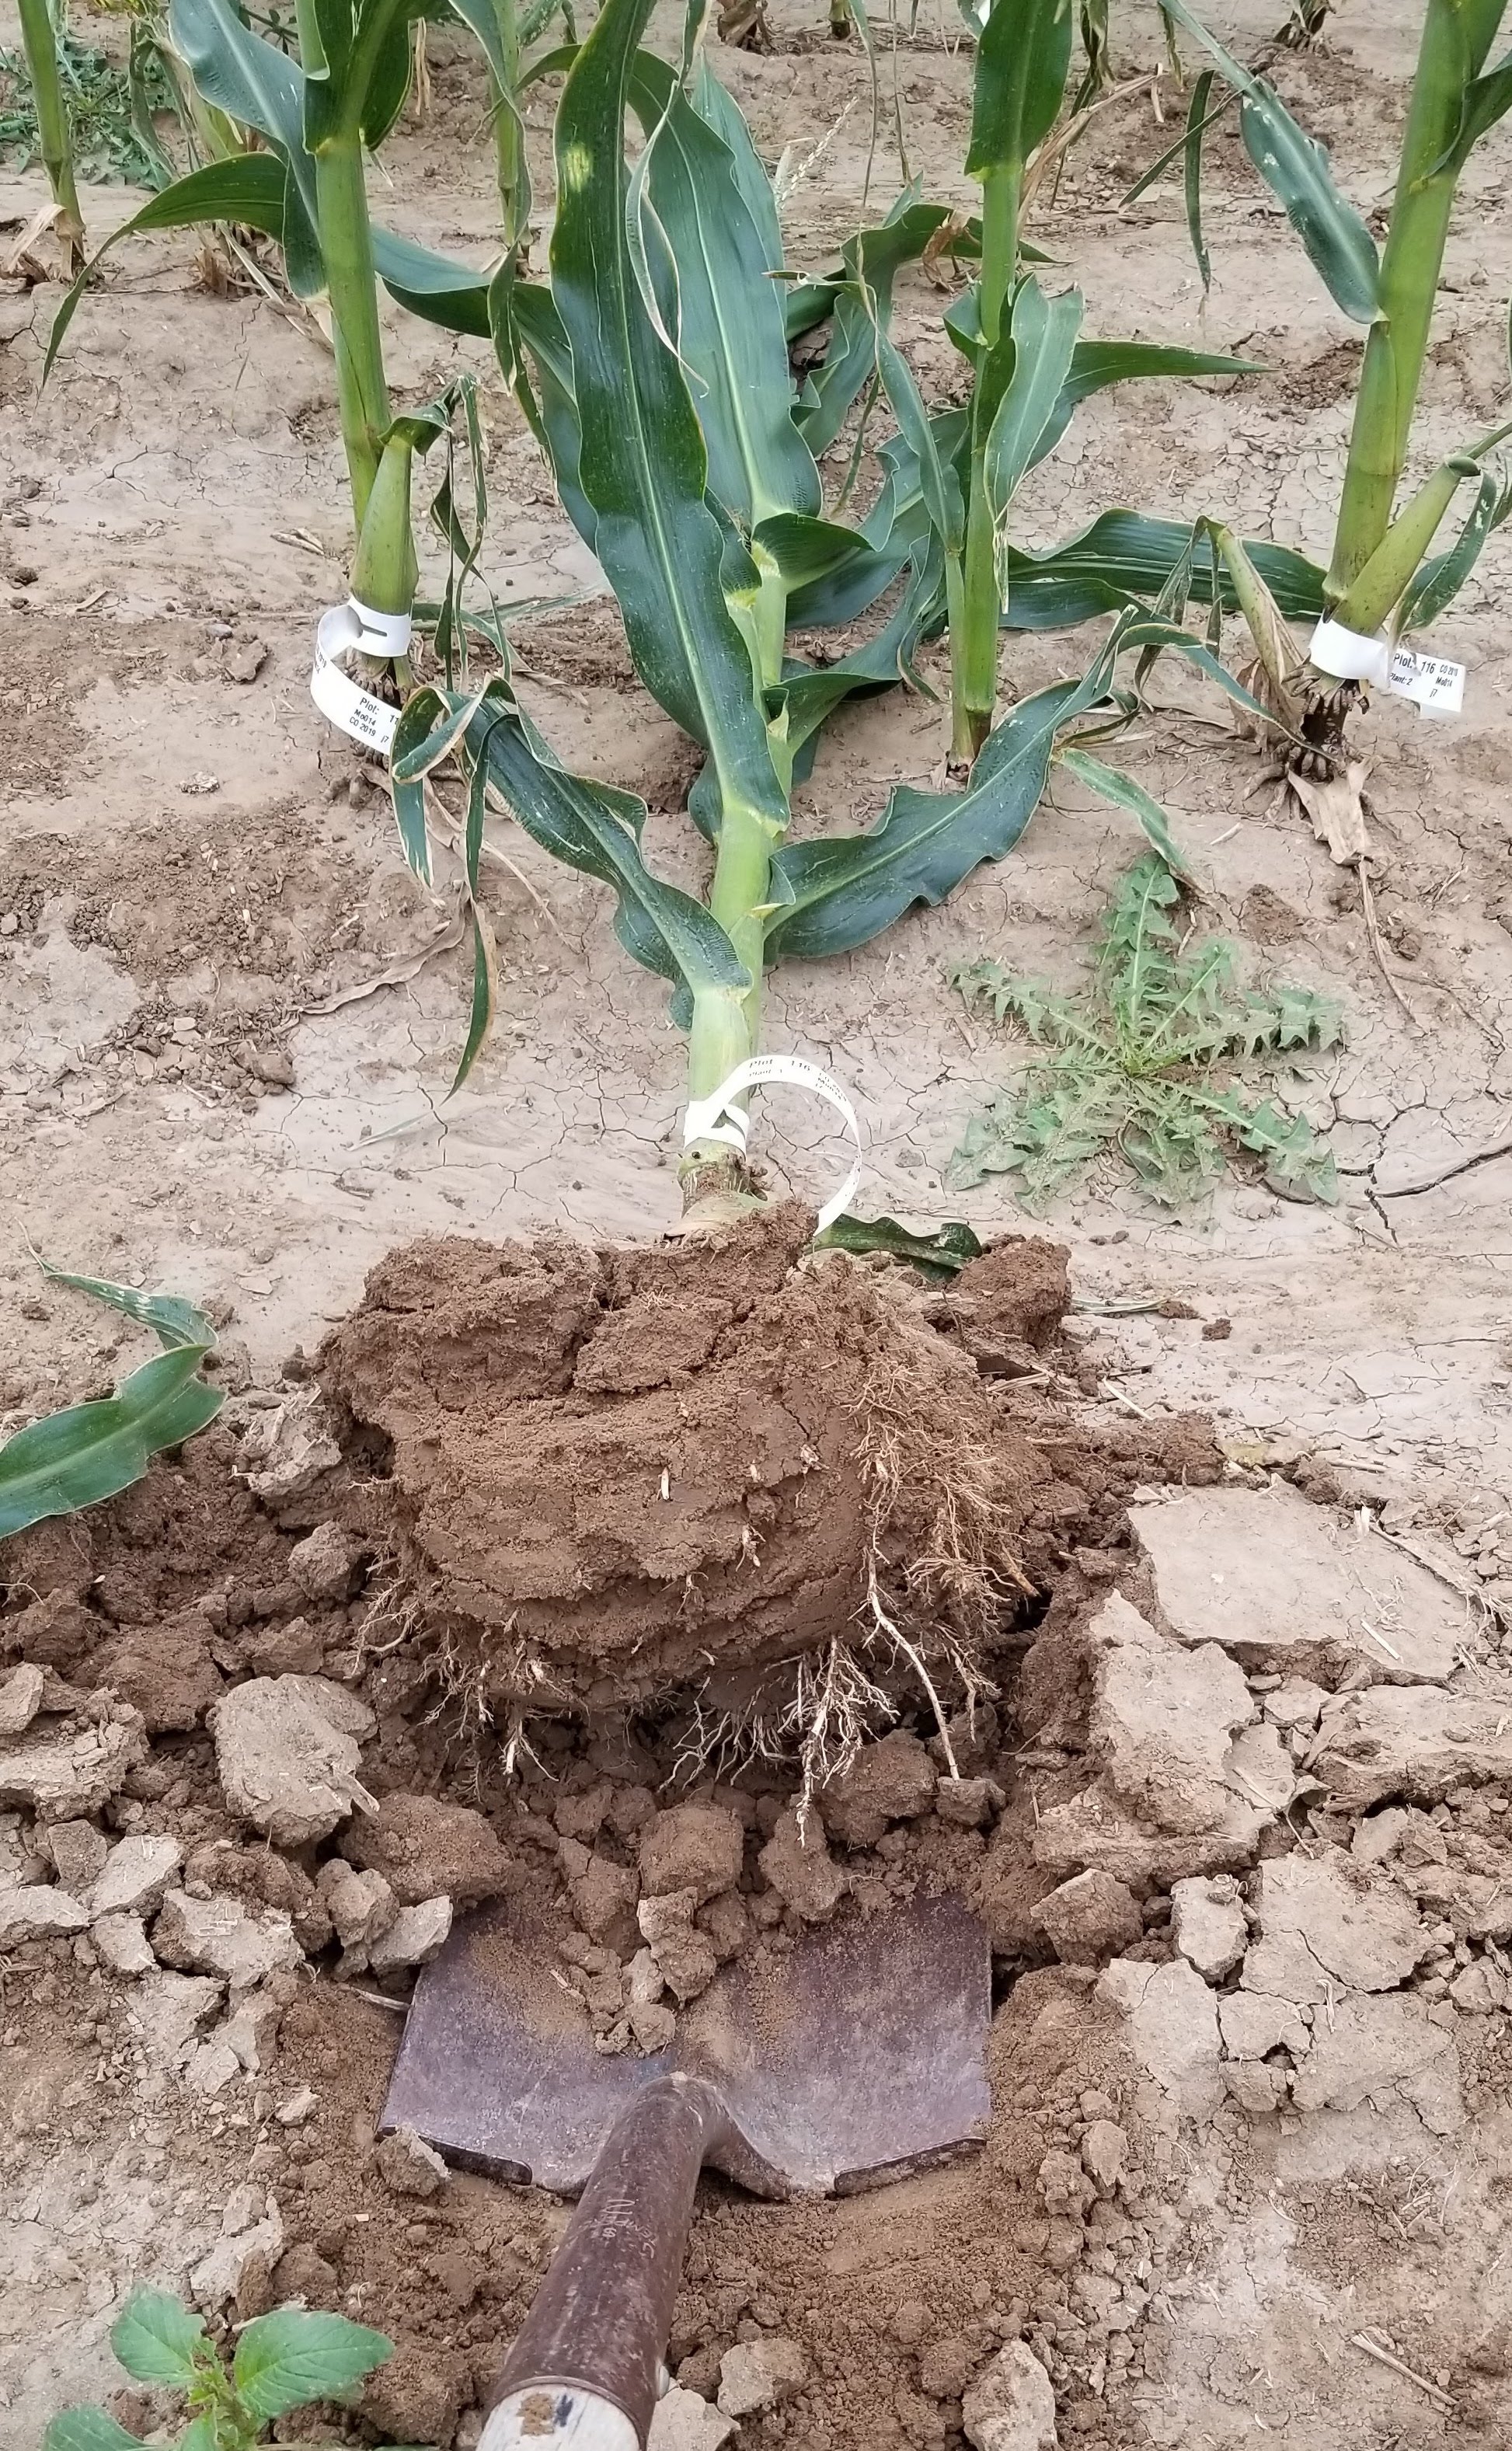 Maize plant with root crown before washing